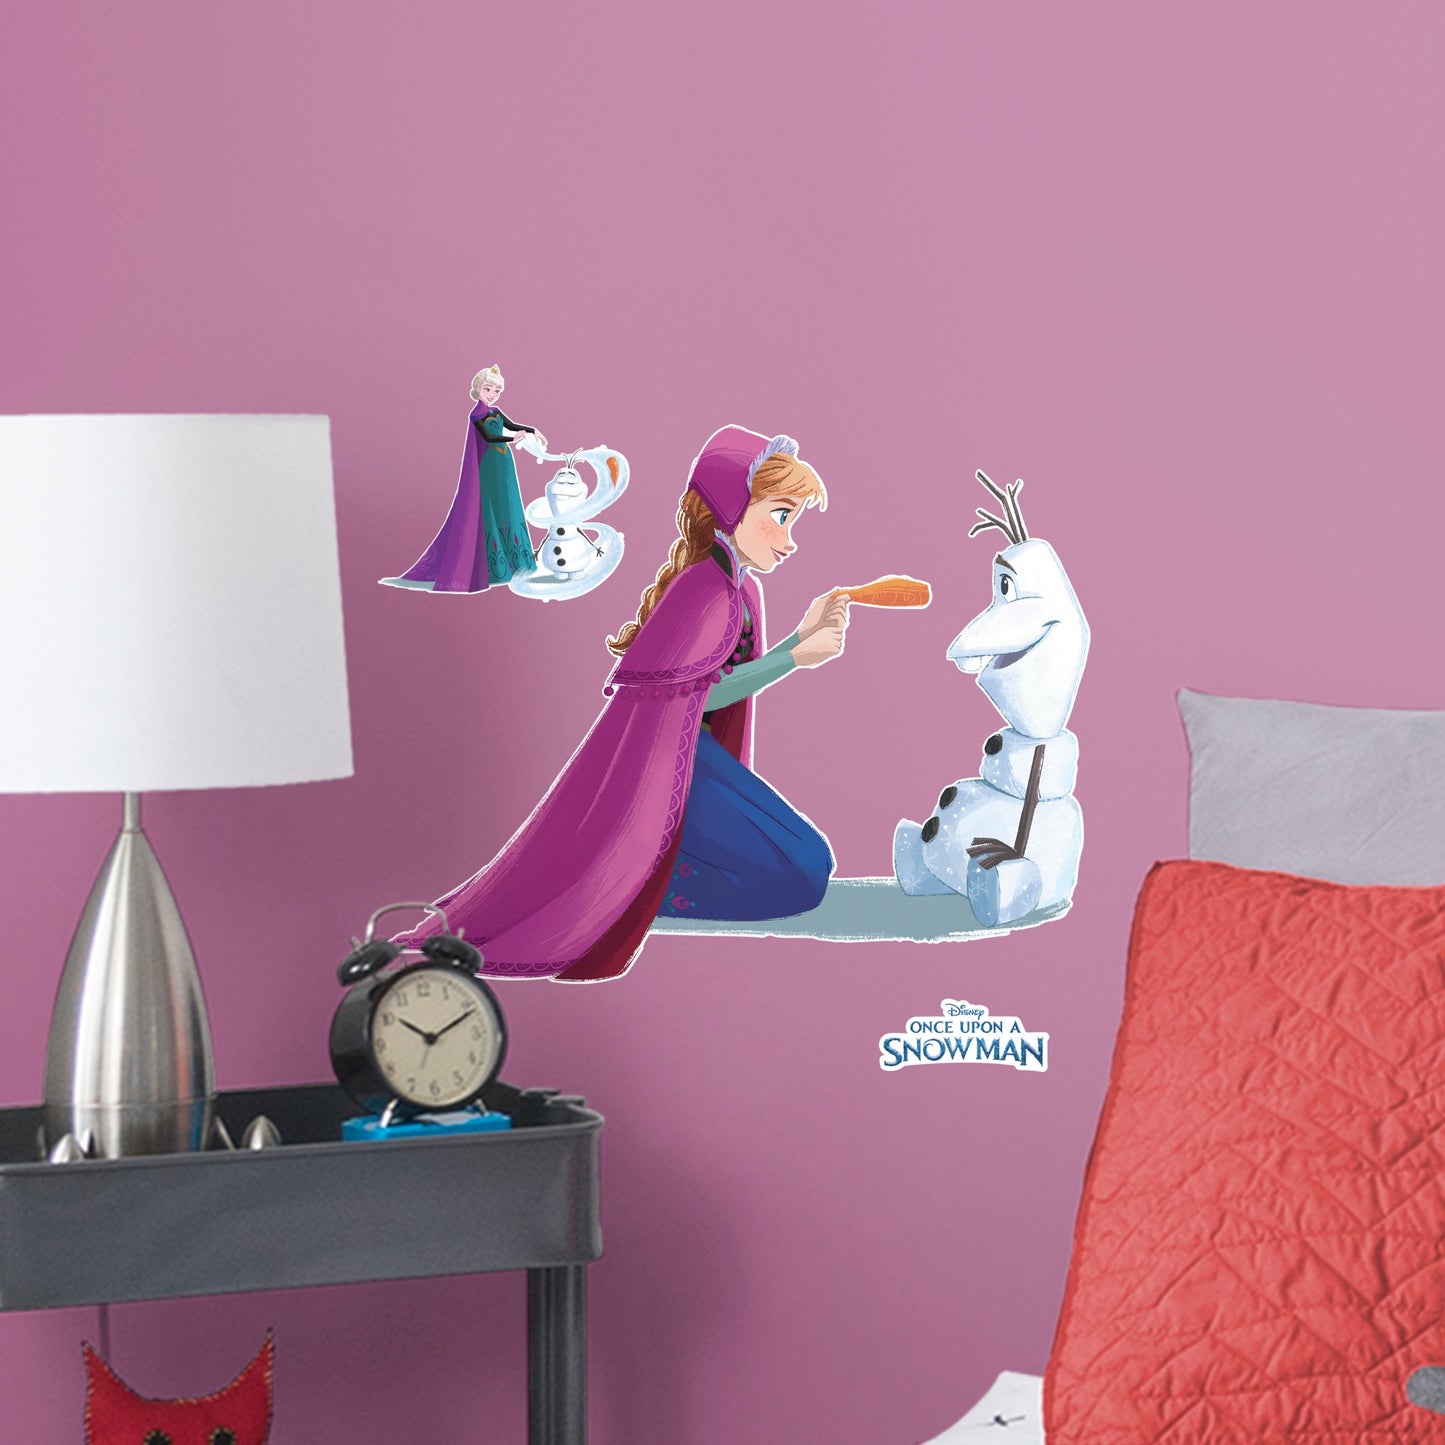 Olaf & Anna: Nose - Frozen - Once Upon A Snowman - Officially Licensed Disney Removable Wall Decal